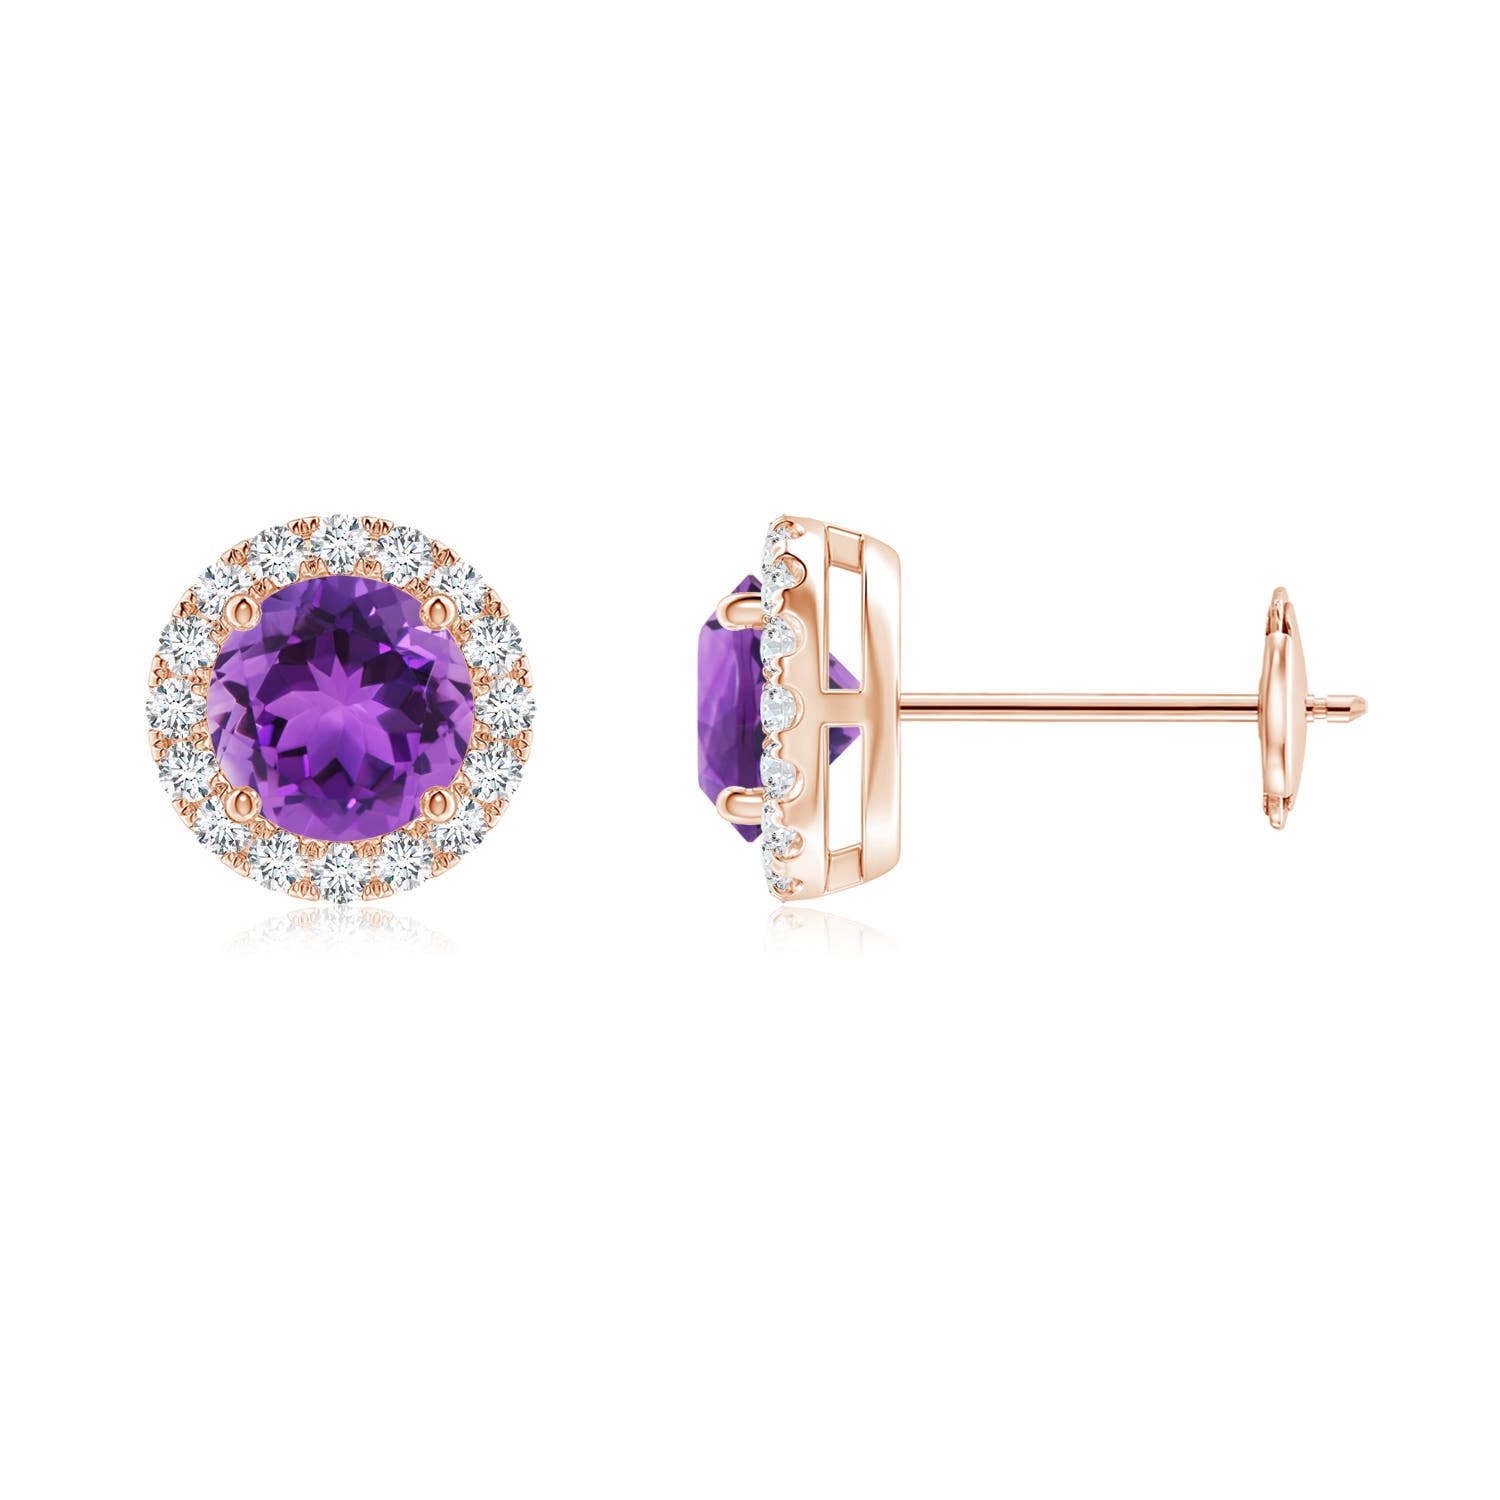 AAA - Amethyst / 1.16 CT / 14 KT Rose Gold